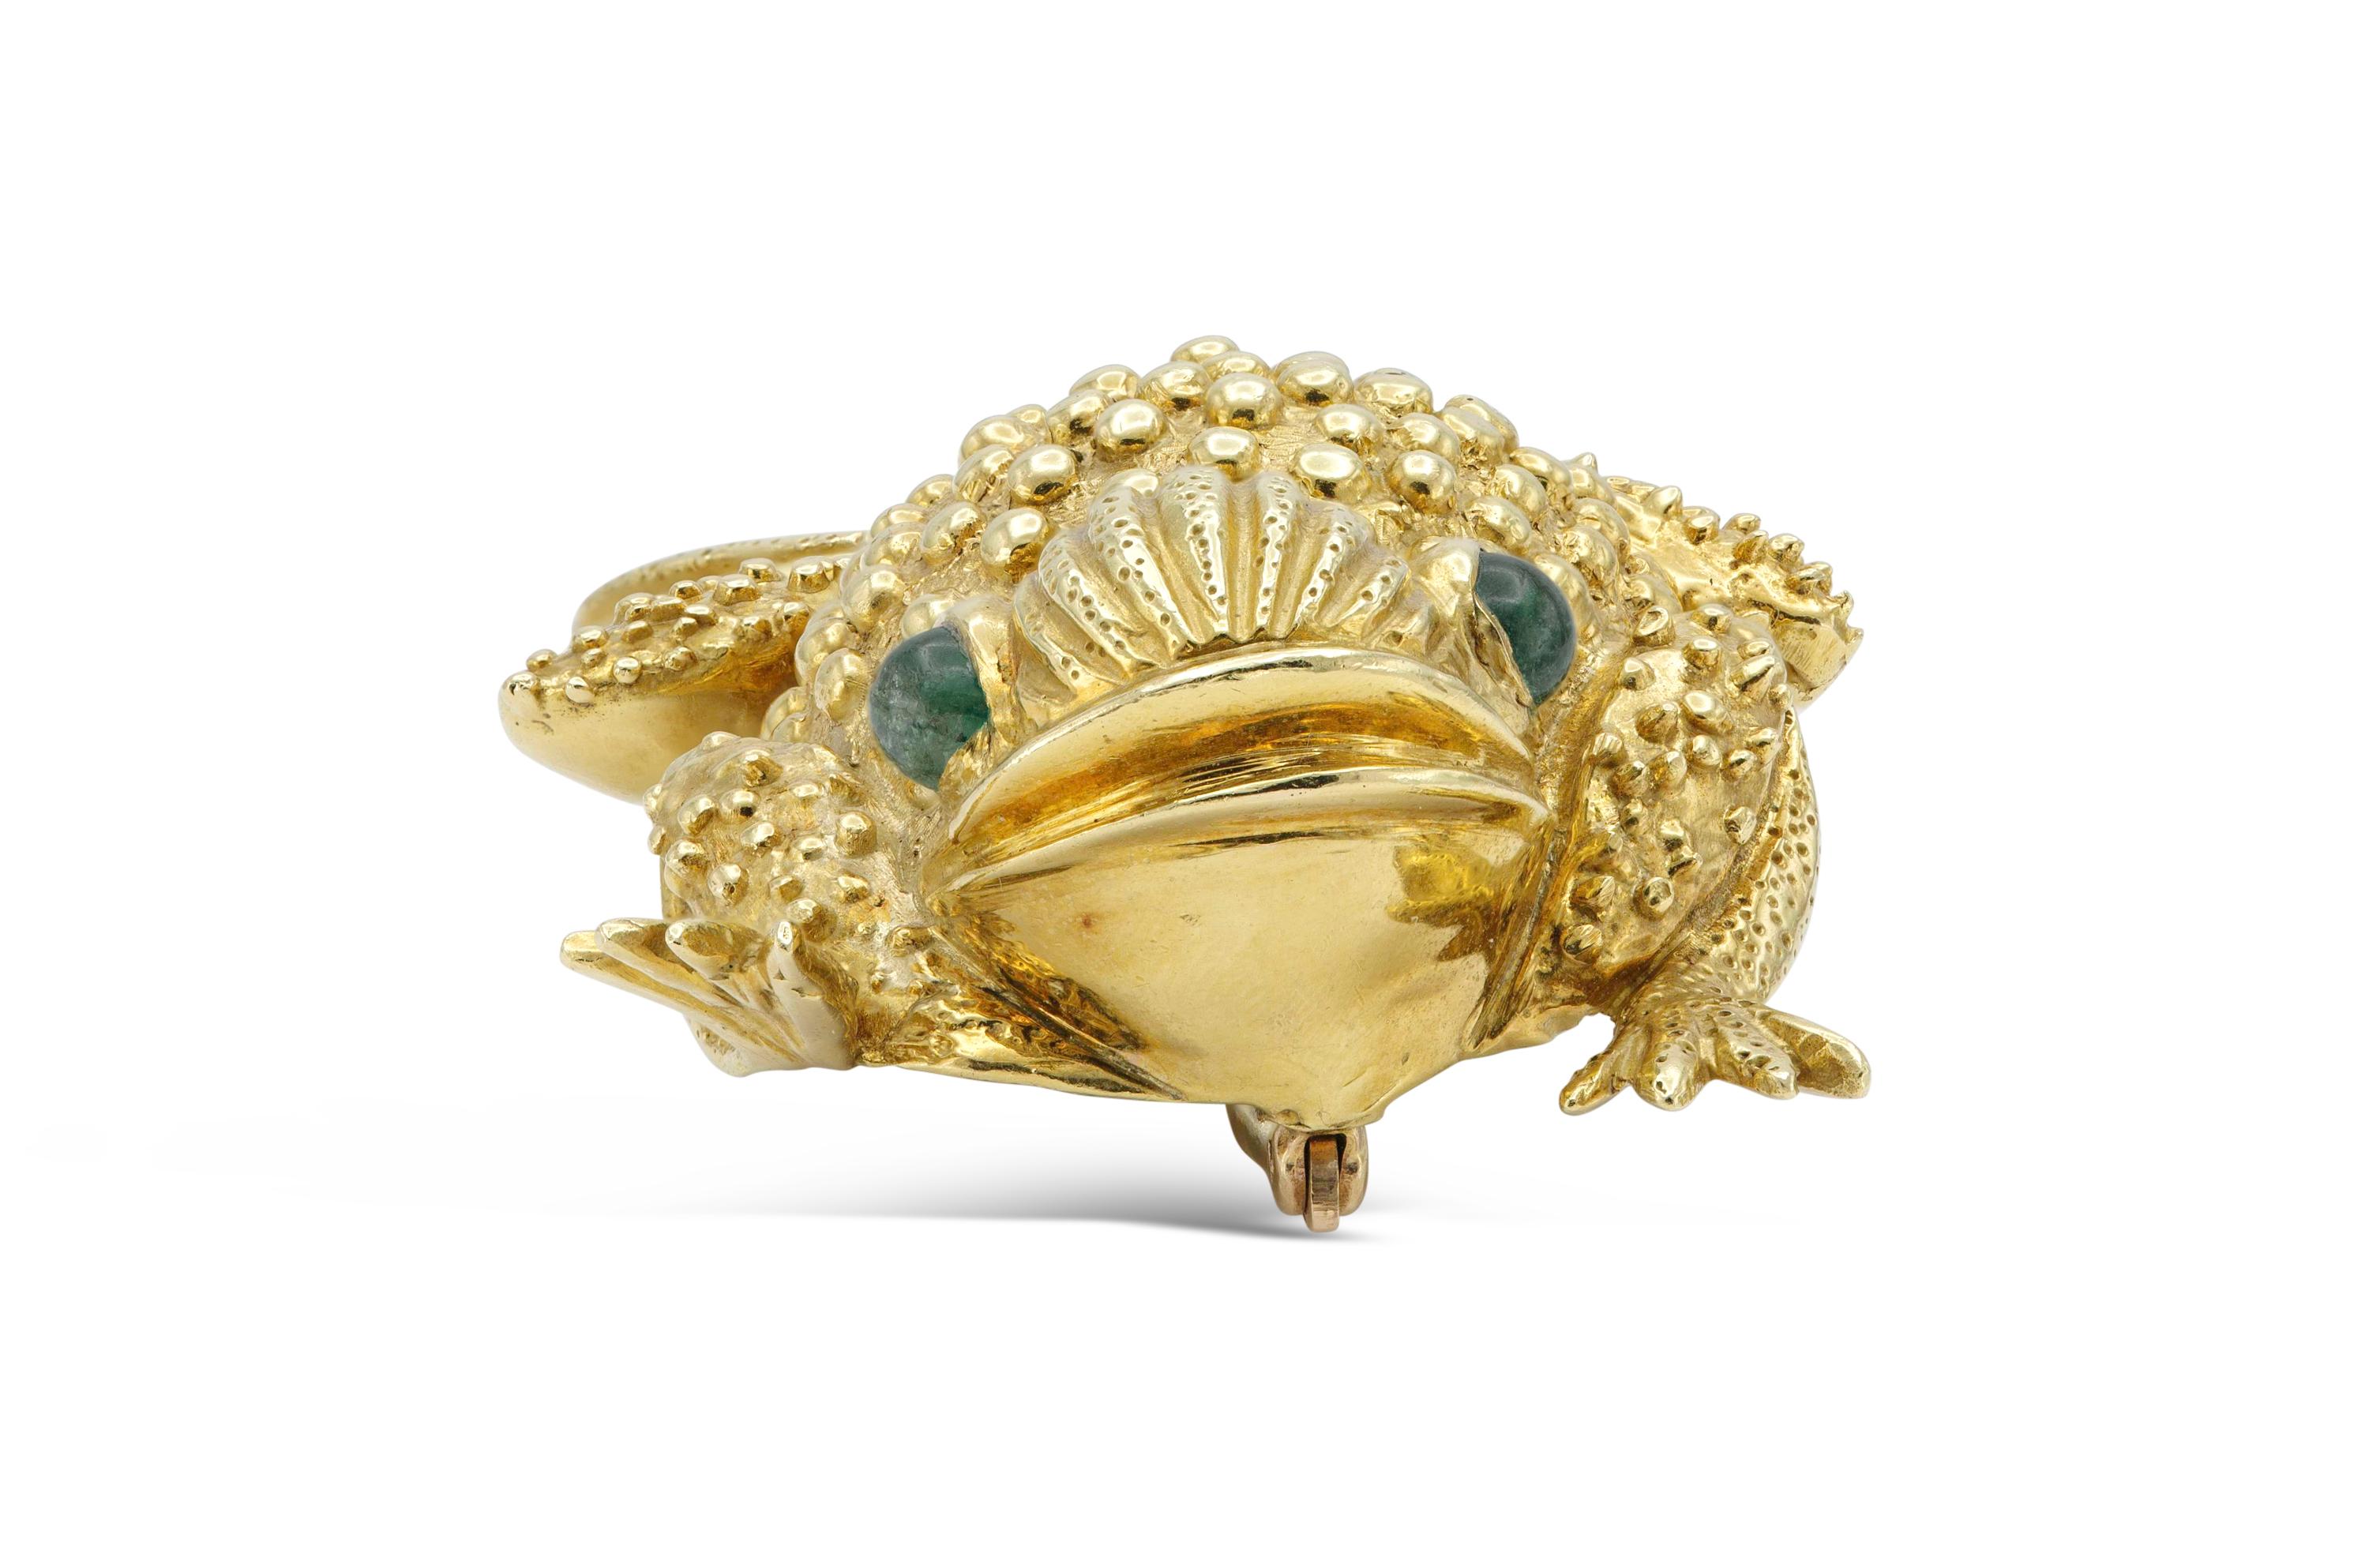 Finely crafted in 18K yellow gold with two cabochon emerald eyes weighing a total of approximately 1.20 carat.
64.30 grams total weight.  